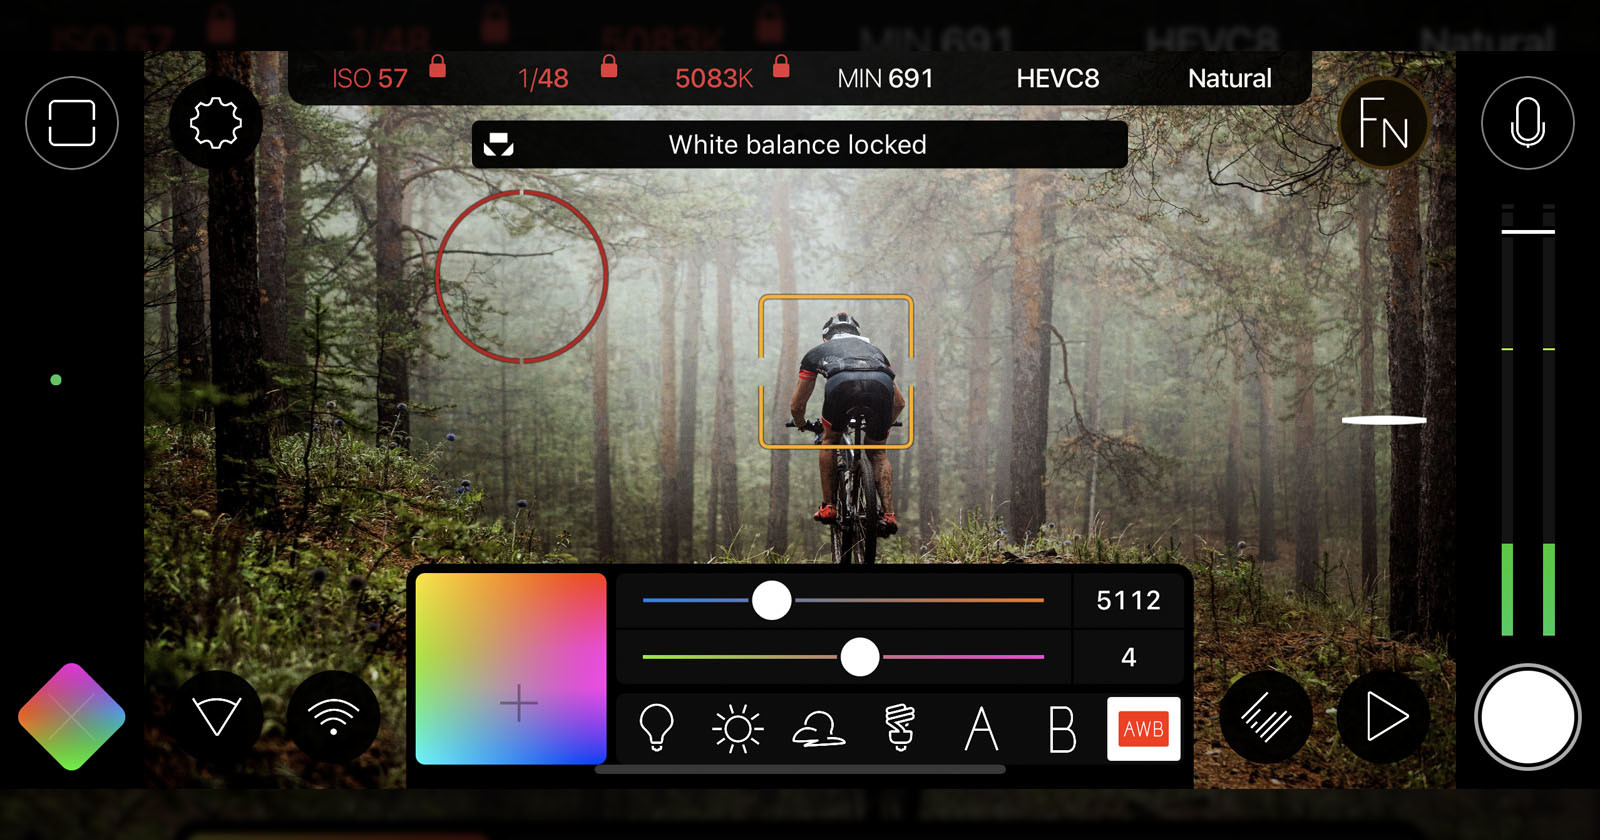  filmic pro brings features redesigned camera 